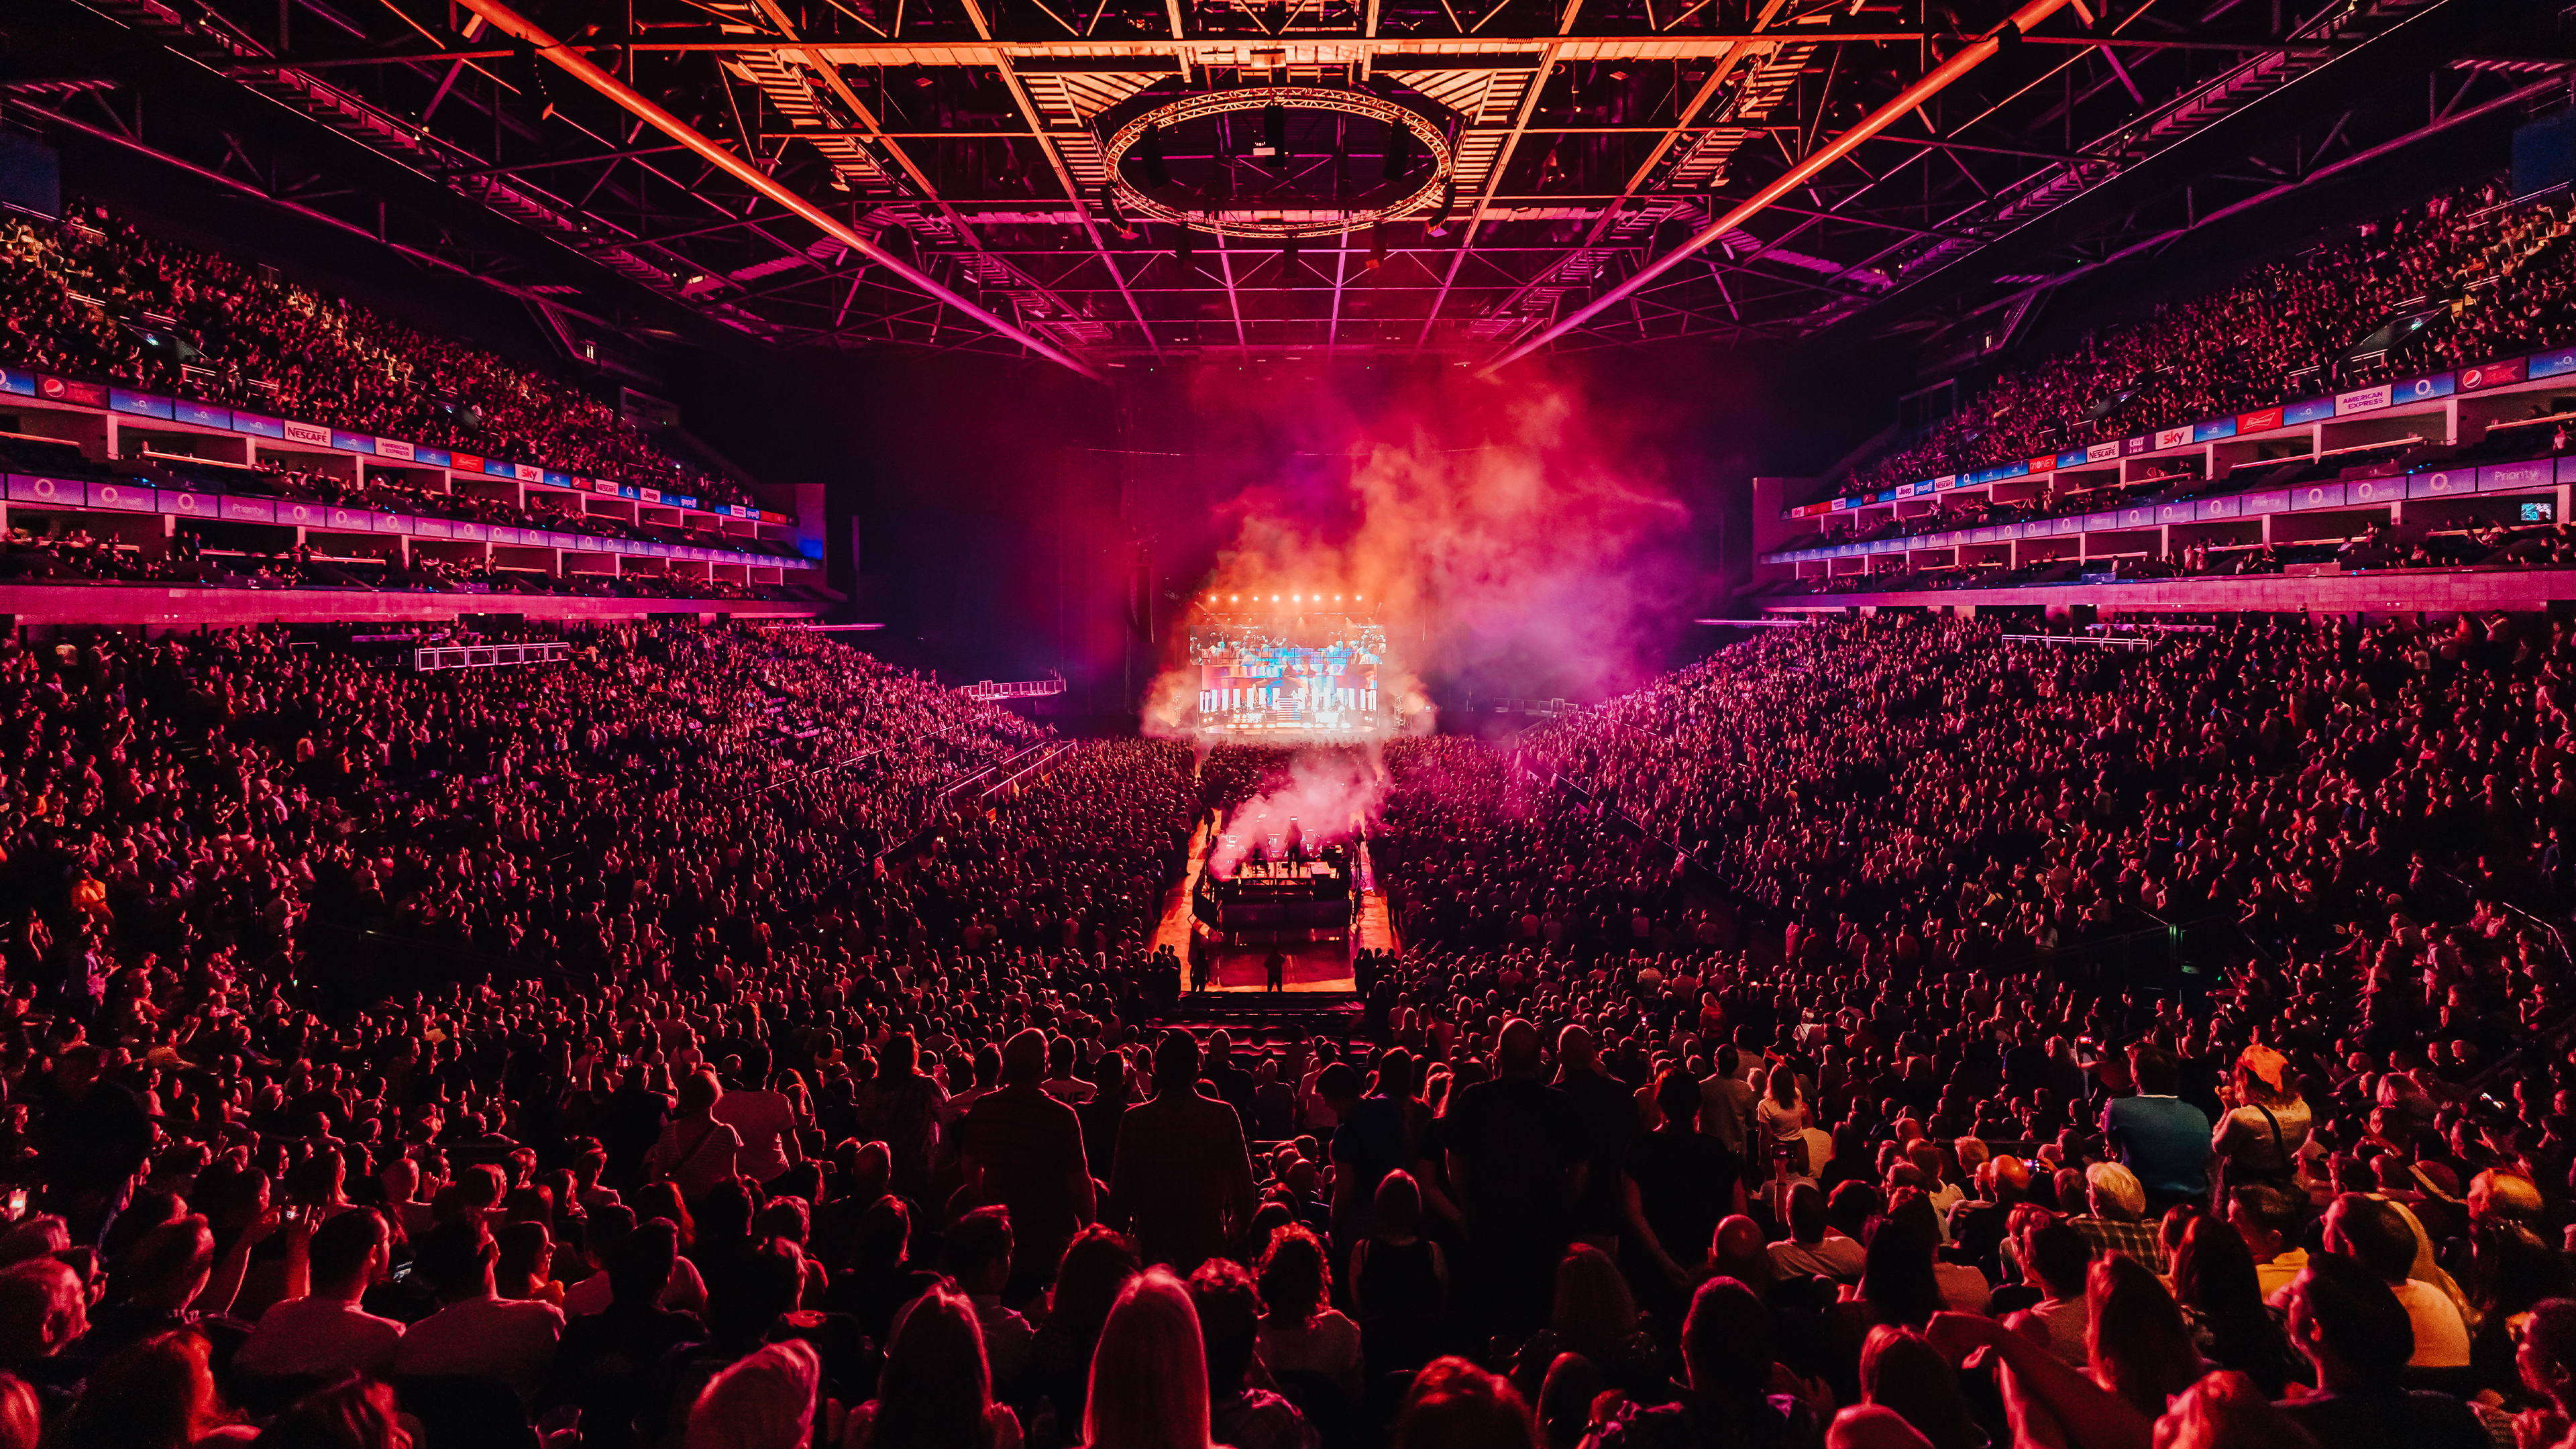 Image of stage at O2 arena lit up in red